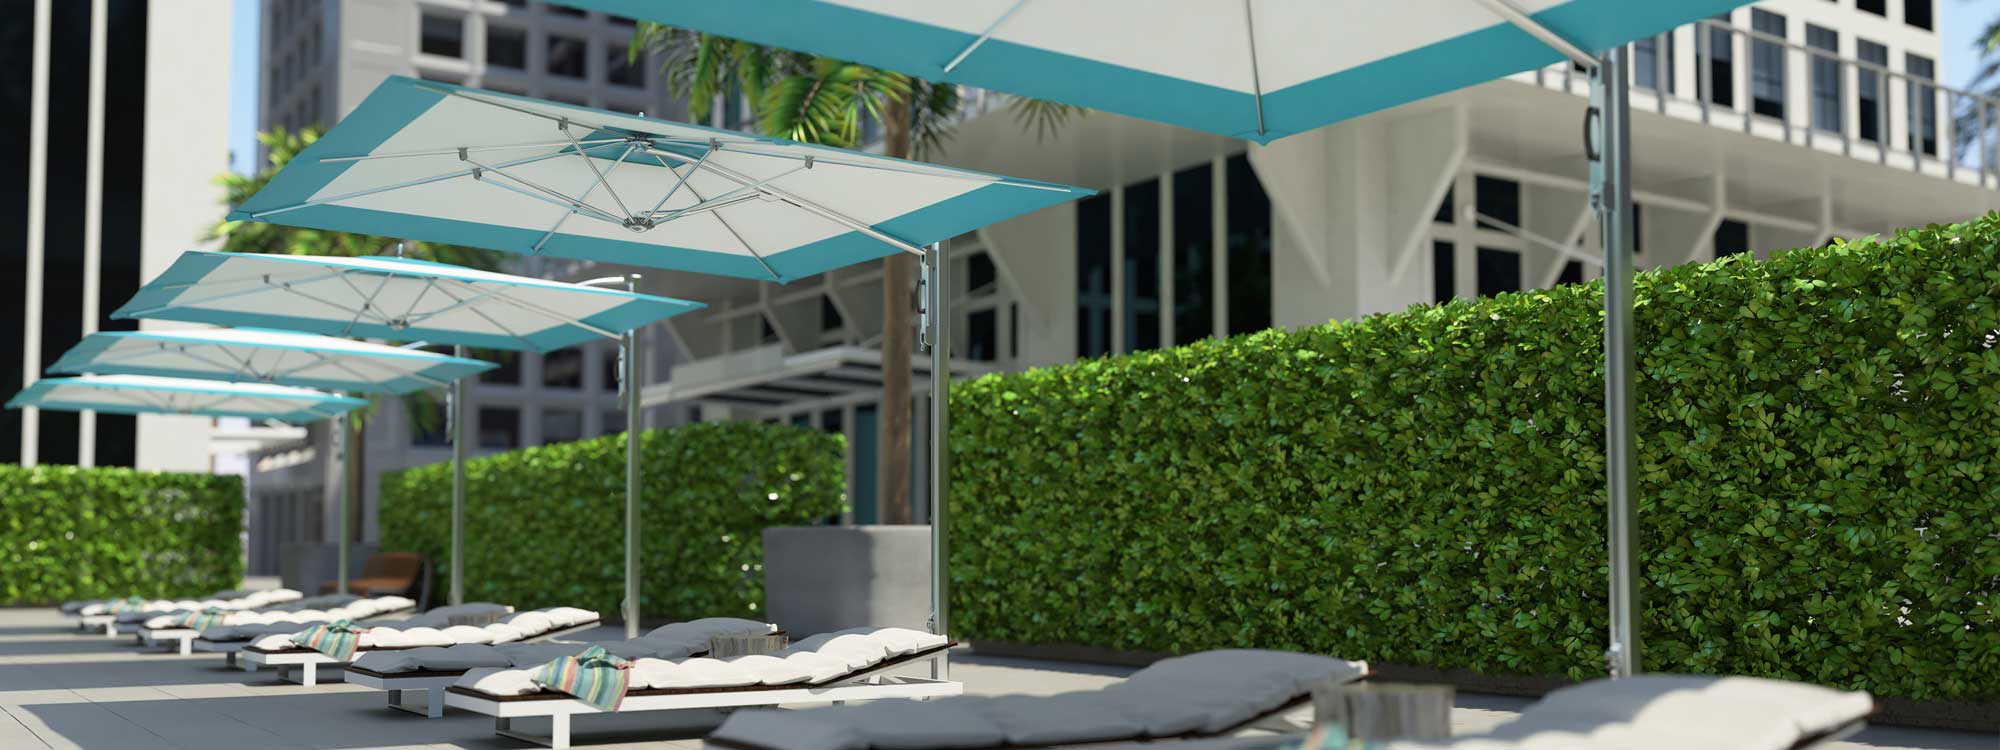 Image of row of Tuuci Ocean Master side mast parasols with contrasting color canopies over sun loungers on hotel poolside